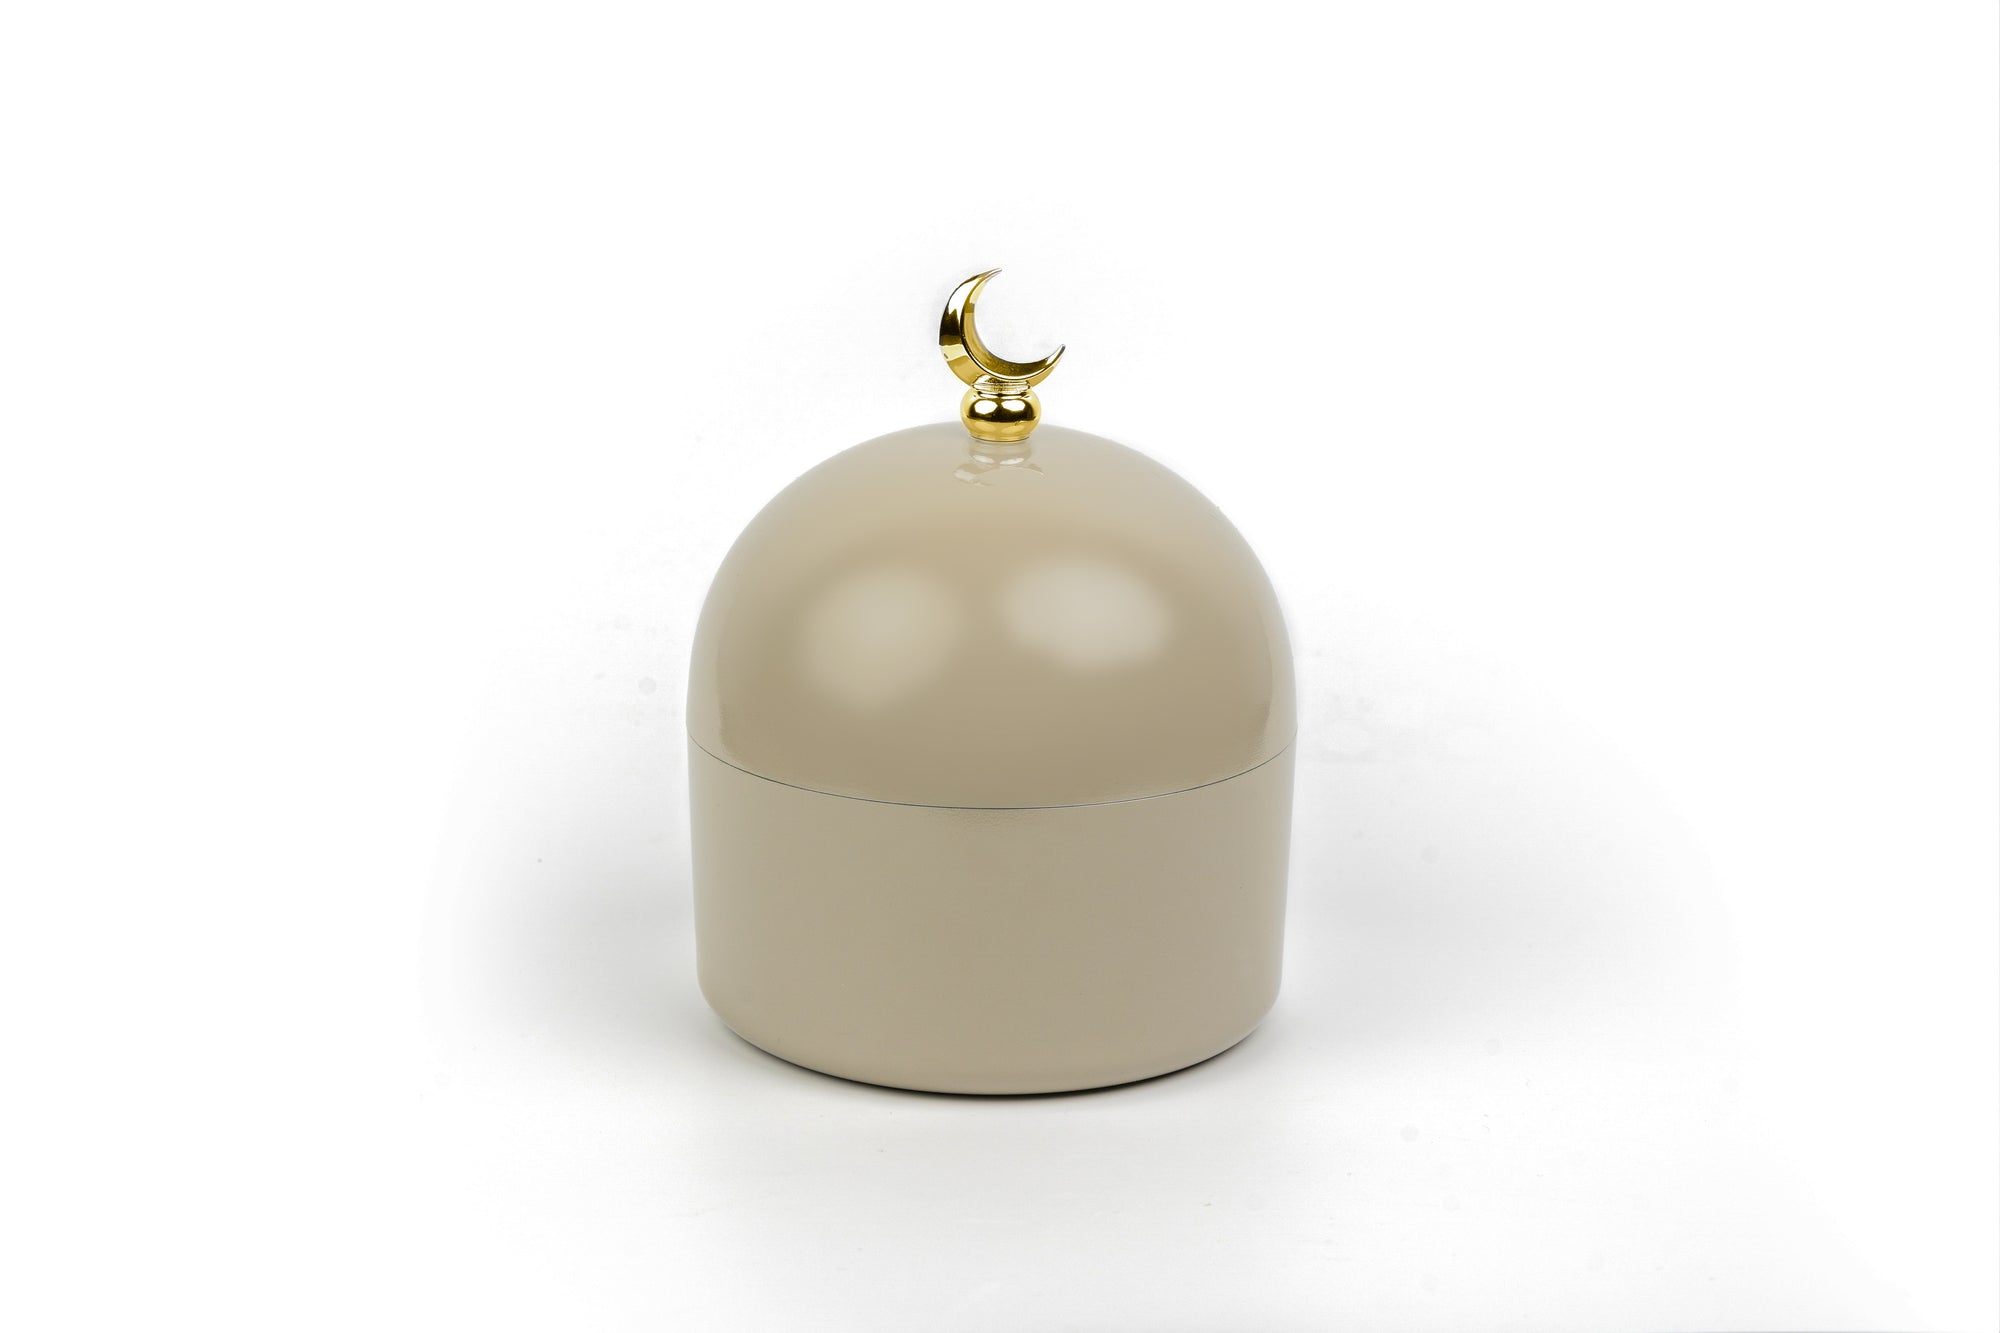 Toasty Taupe Moon Dome Jar with Golden Crescent for Ramadan Eid Gifts and home decor